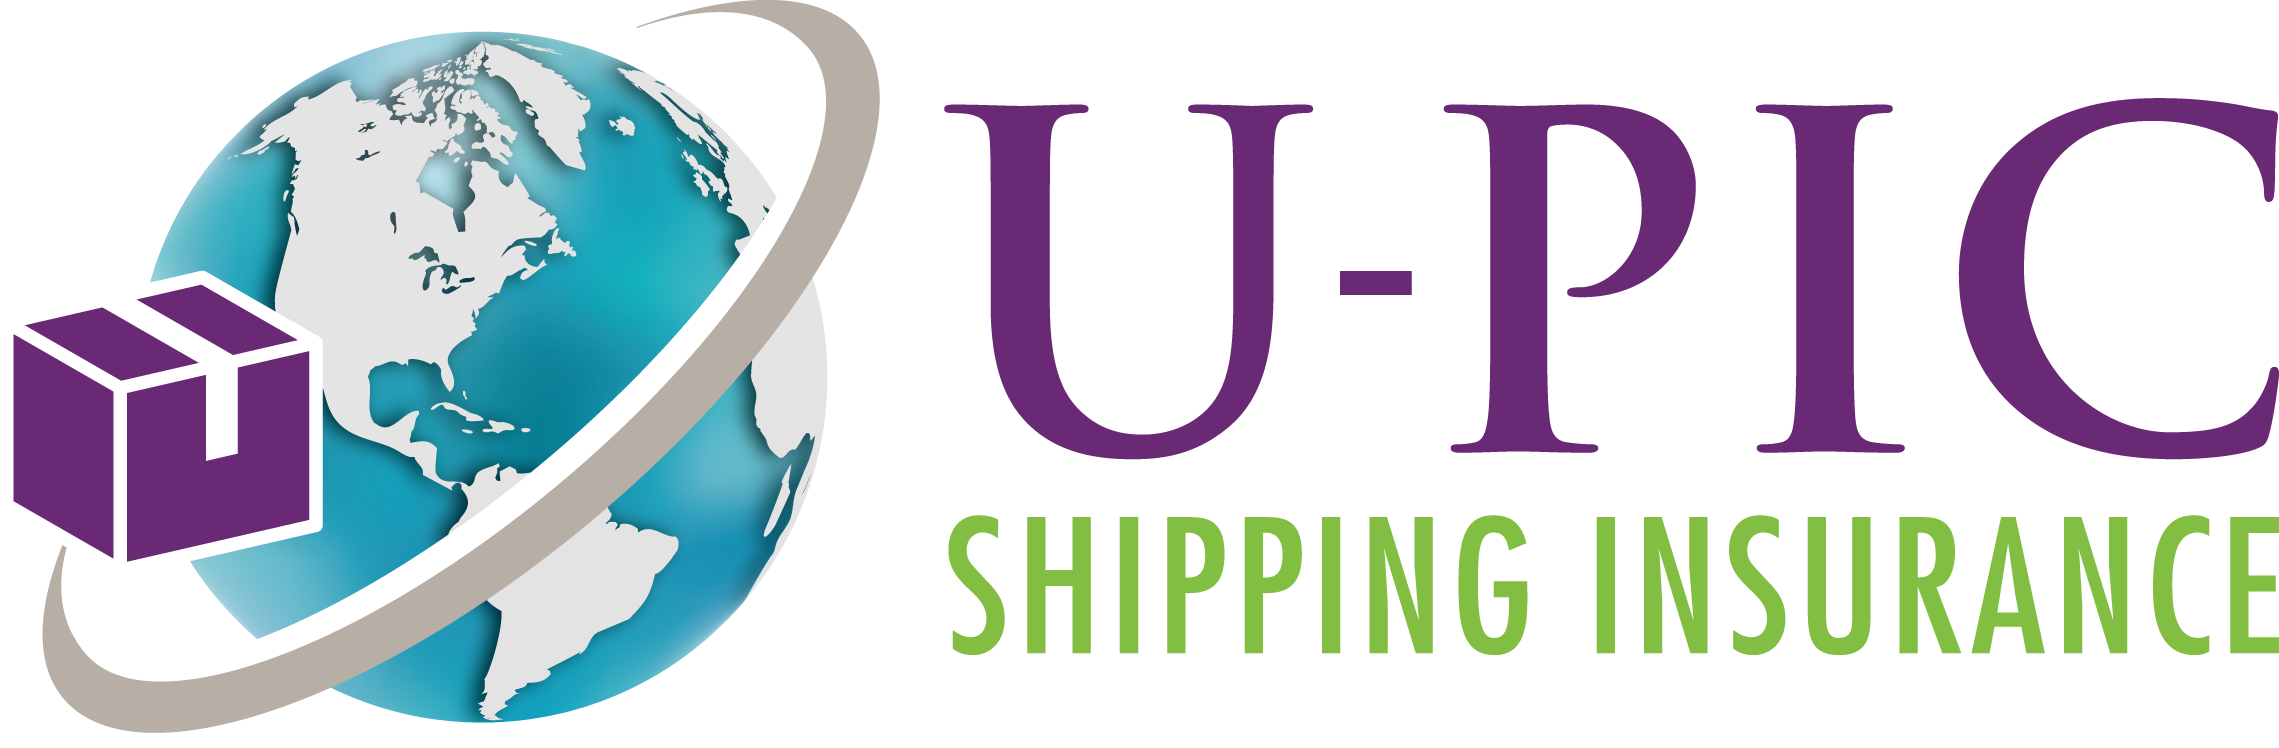 U-PIC is providing shipping insurance to both individuals and businesses since 1989